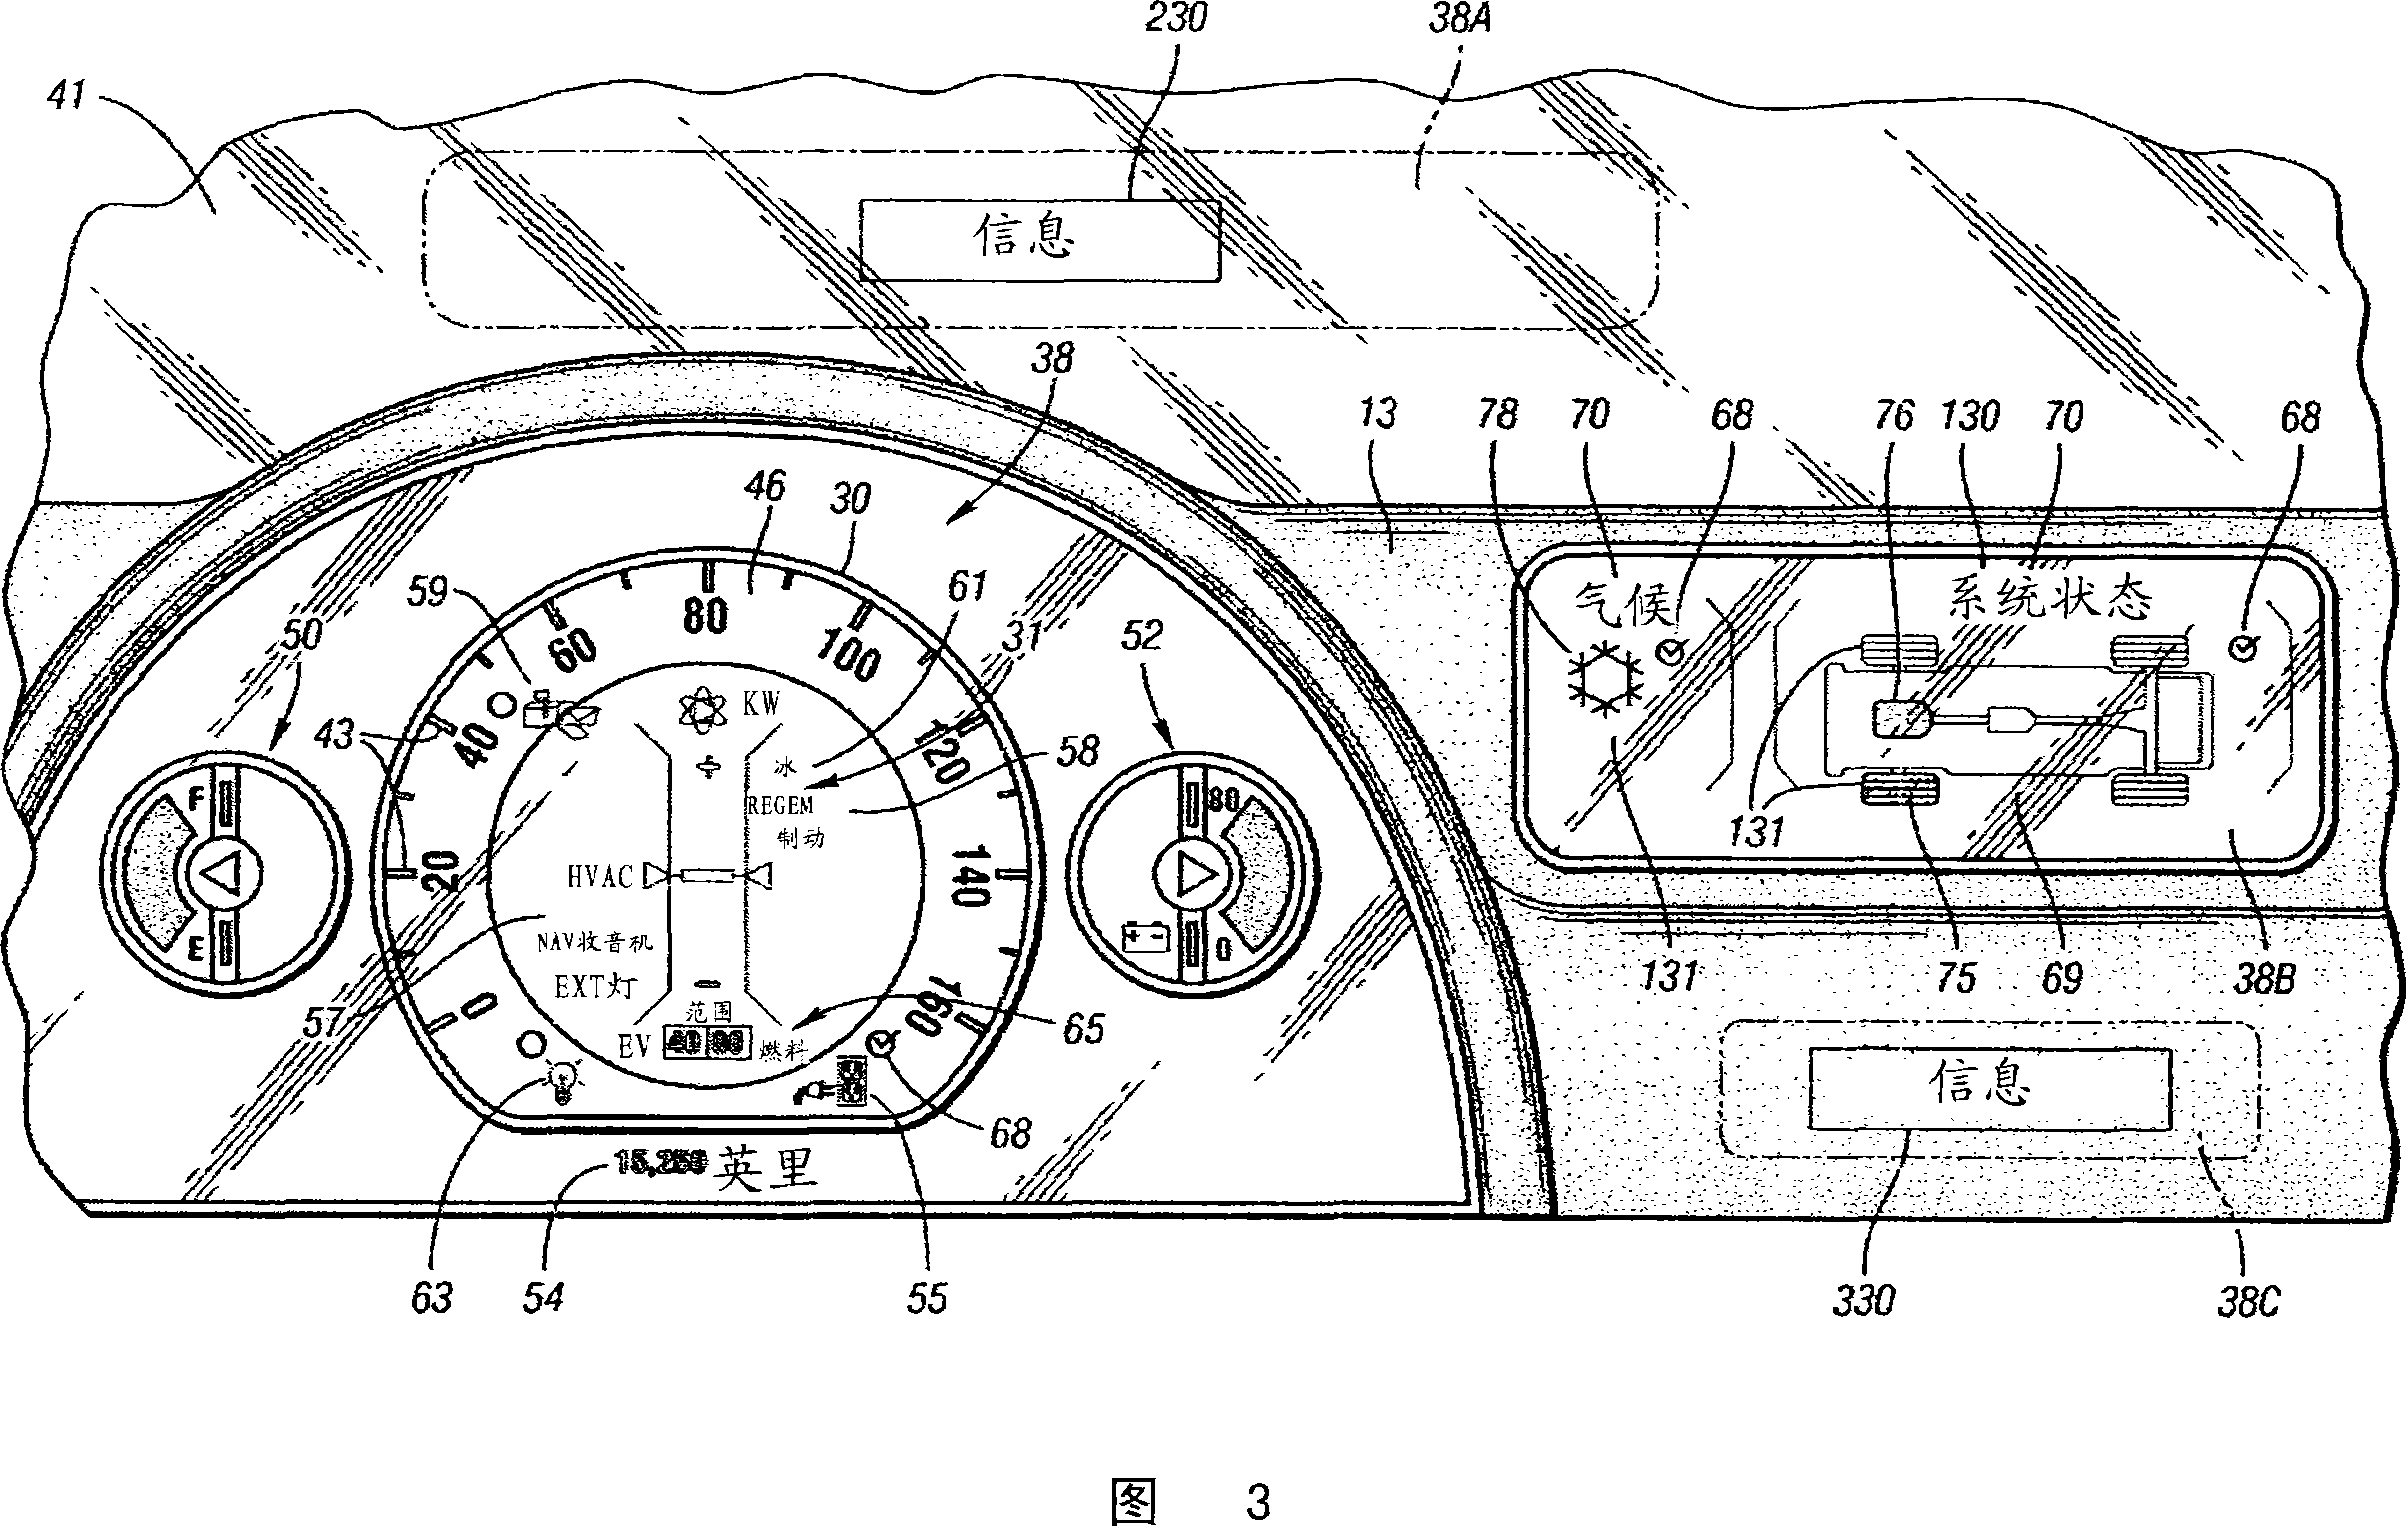 Apparatus and method for displaying information within a vehicle interior